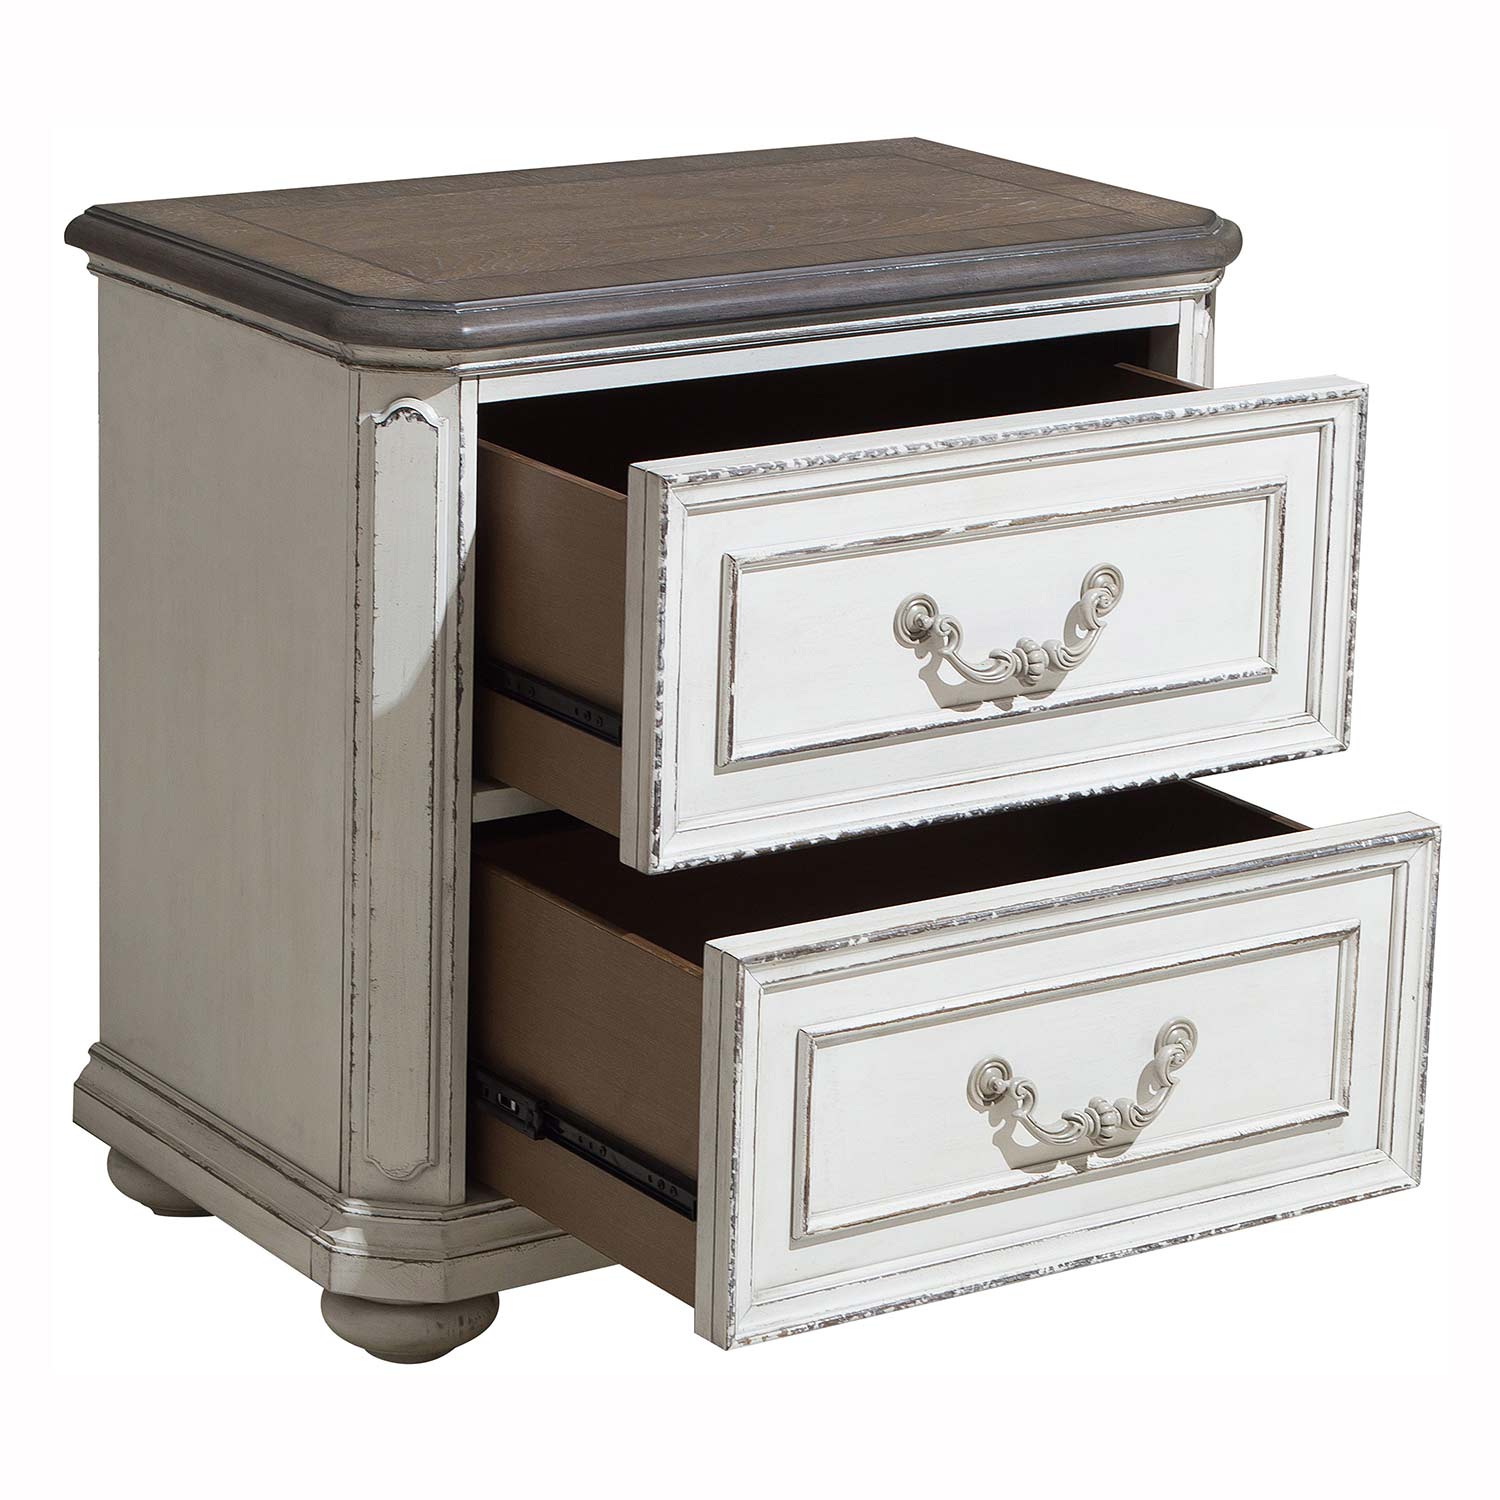 Homelegance Willowick Night Stand - Antique White